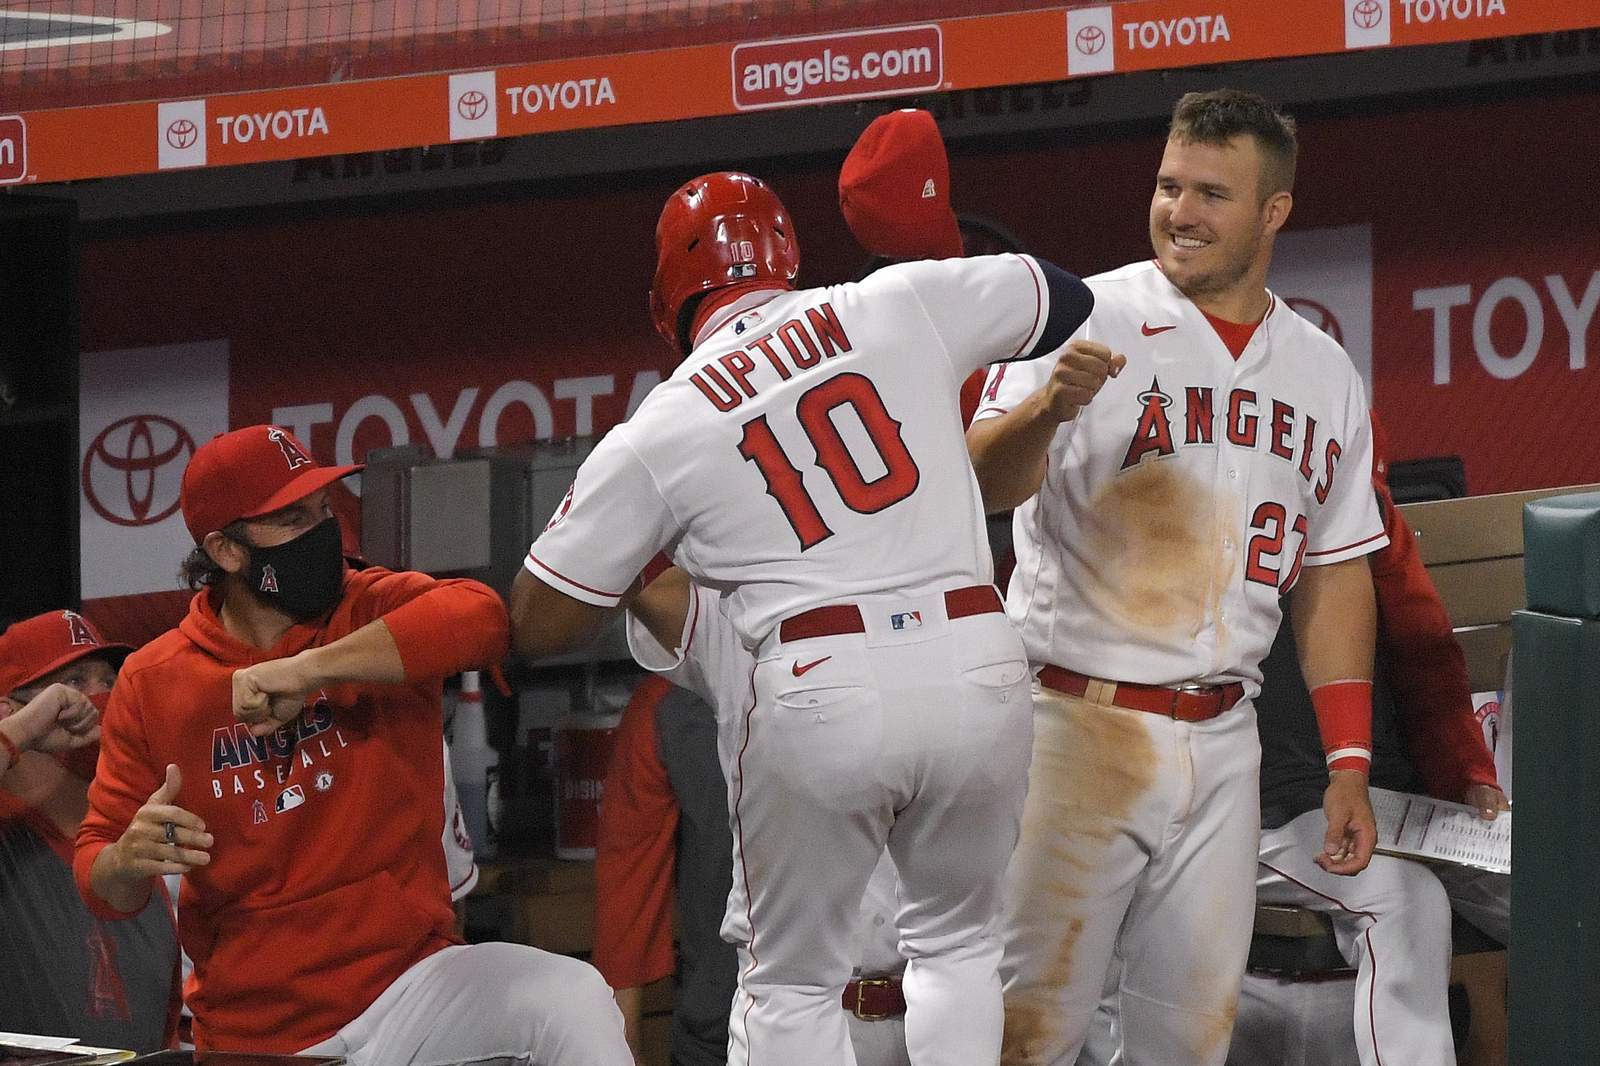 Mike Trout to return to Angels on Tuesday after baby's birth